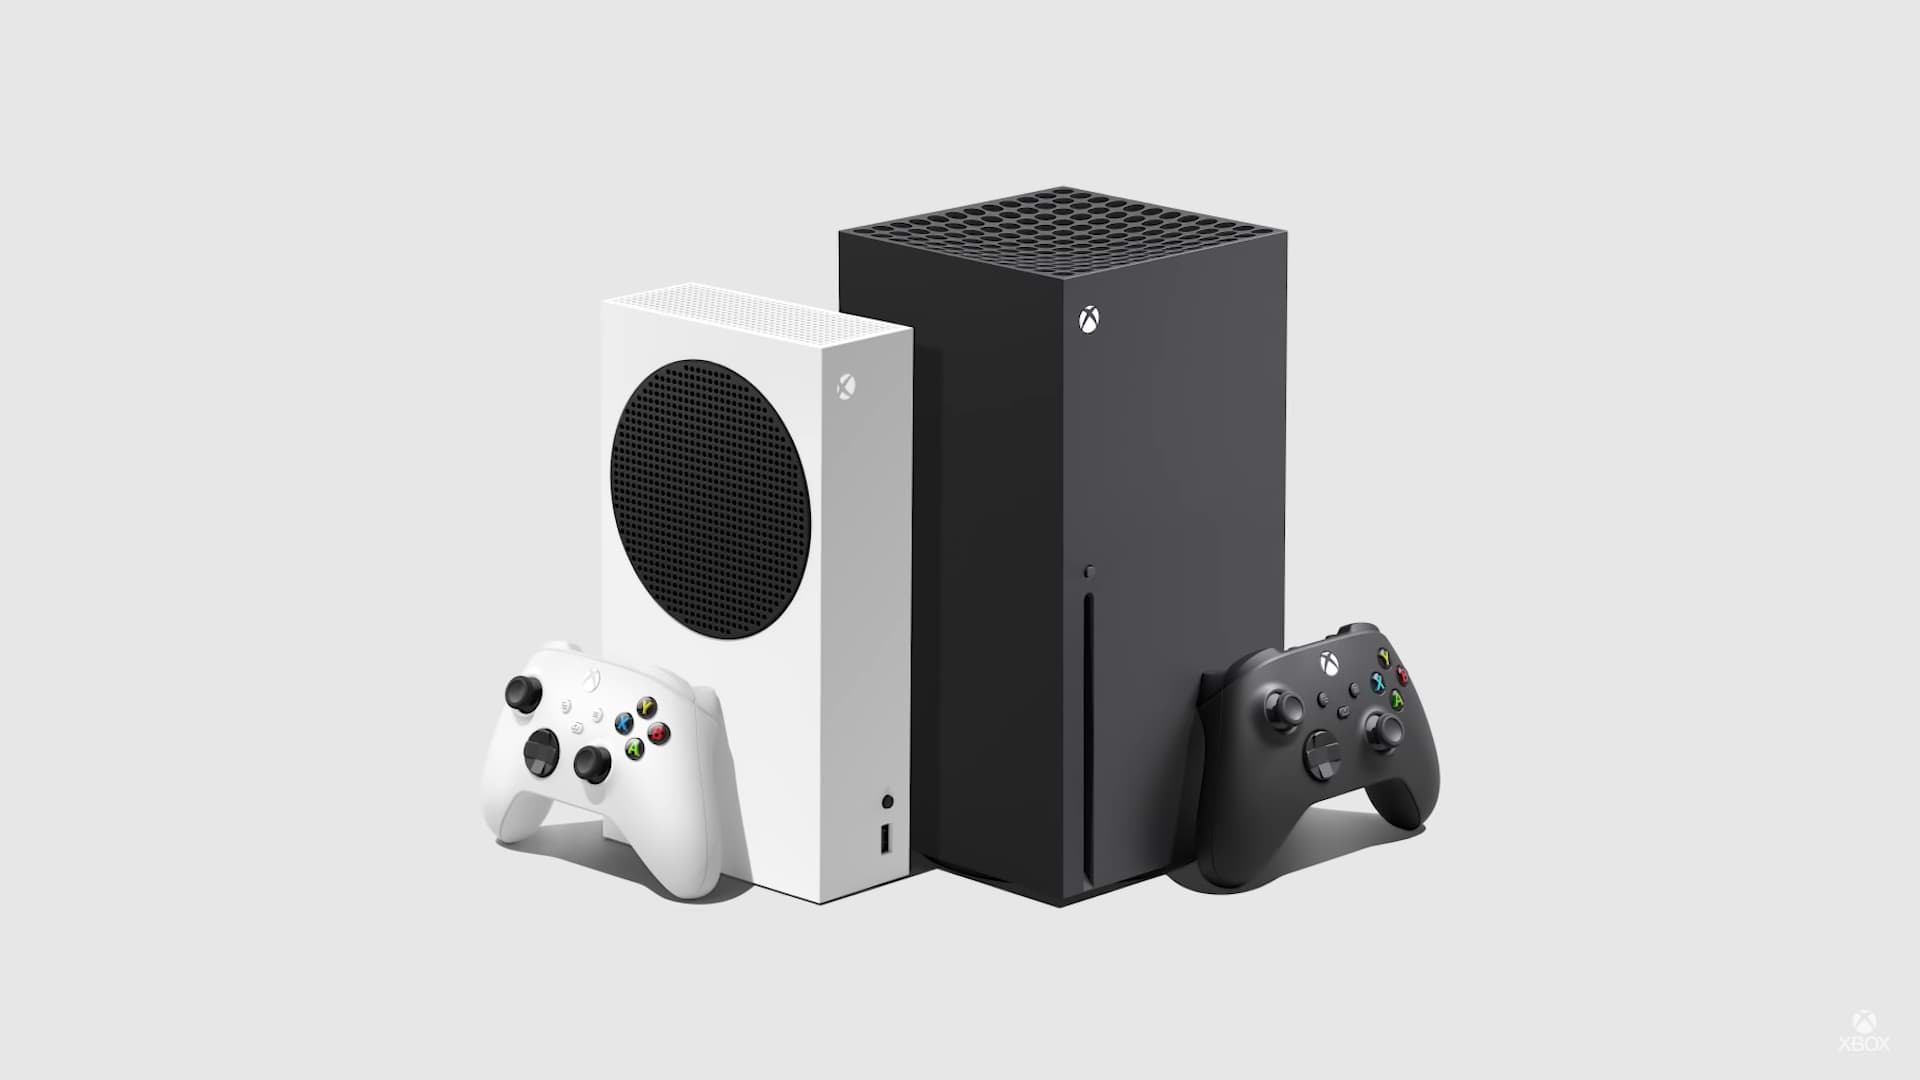 The Xbox Series S weighs less than half the weight of the Xbox Series X